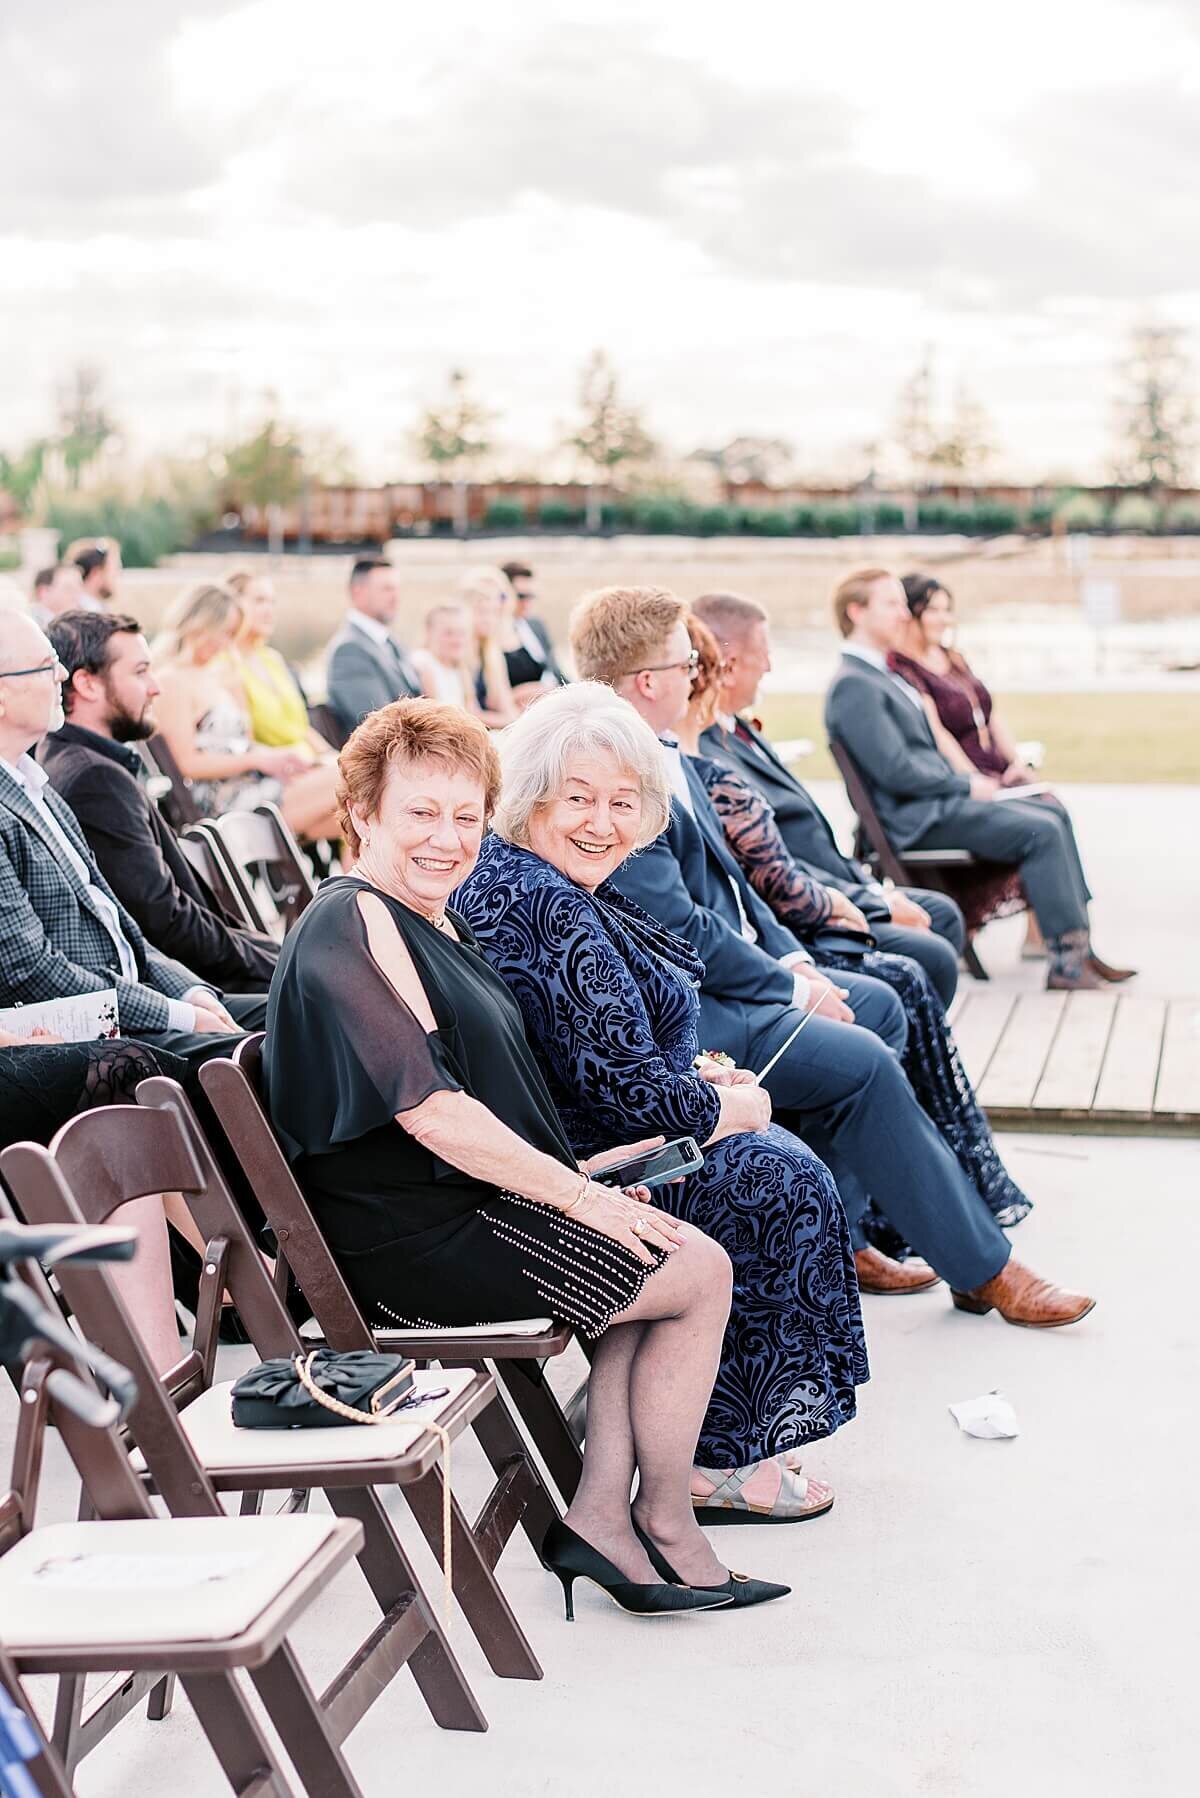 Outdoor Wedding Ceremony at the Weinberg at Wixon Valley in Bryan, Texas photographed by Alicia Yarrish Photography